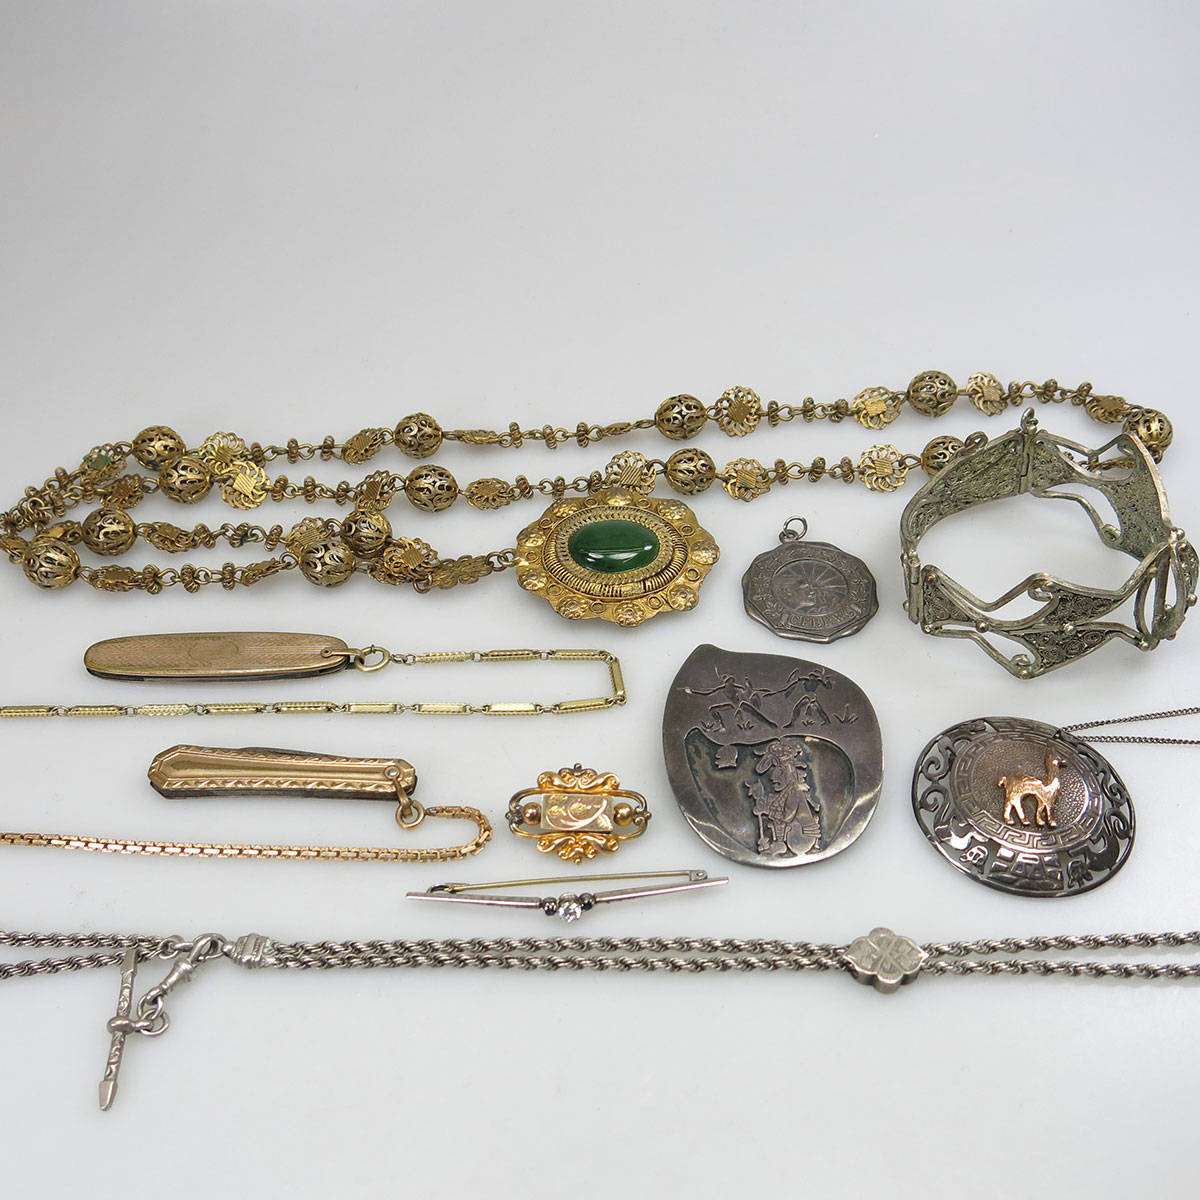 Quantity Of Costume, Silver And Gold-Filled Jewellery